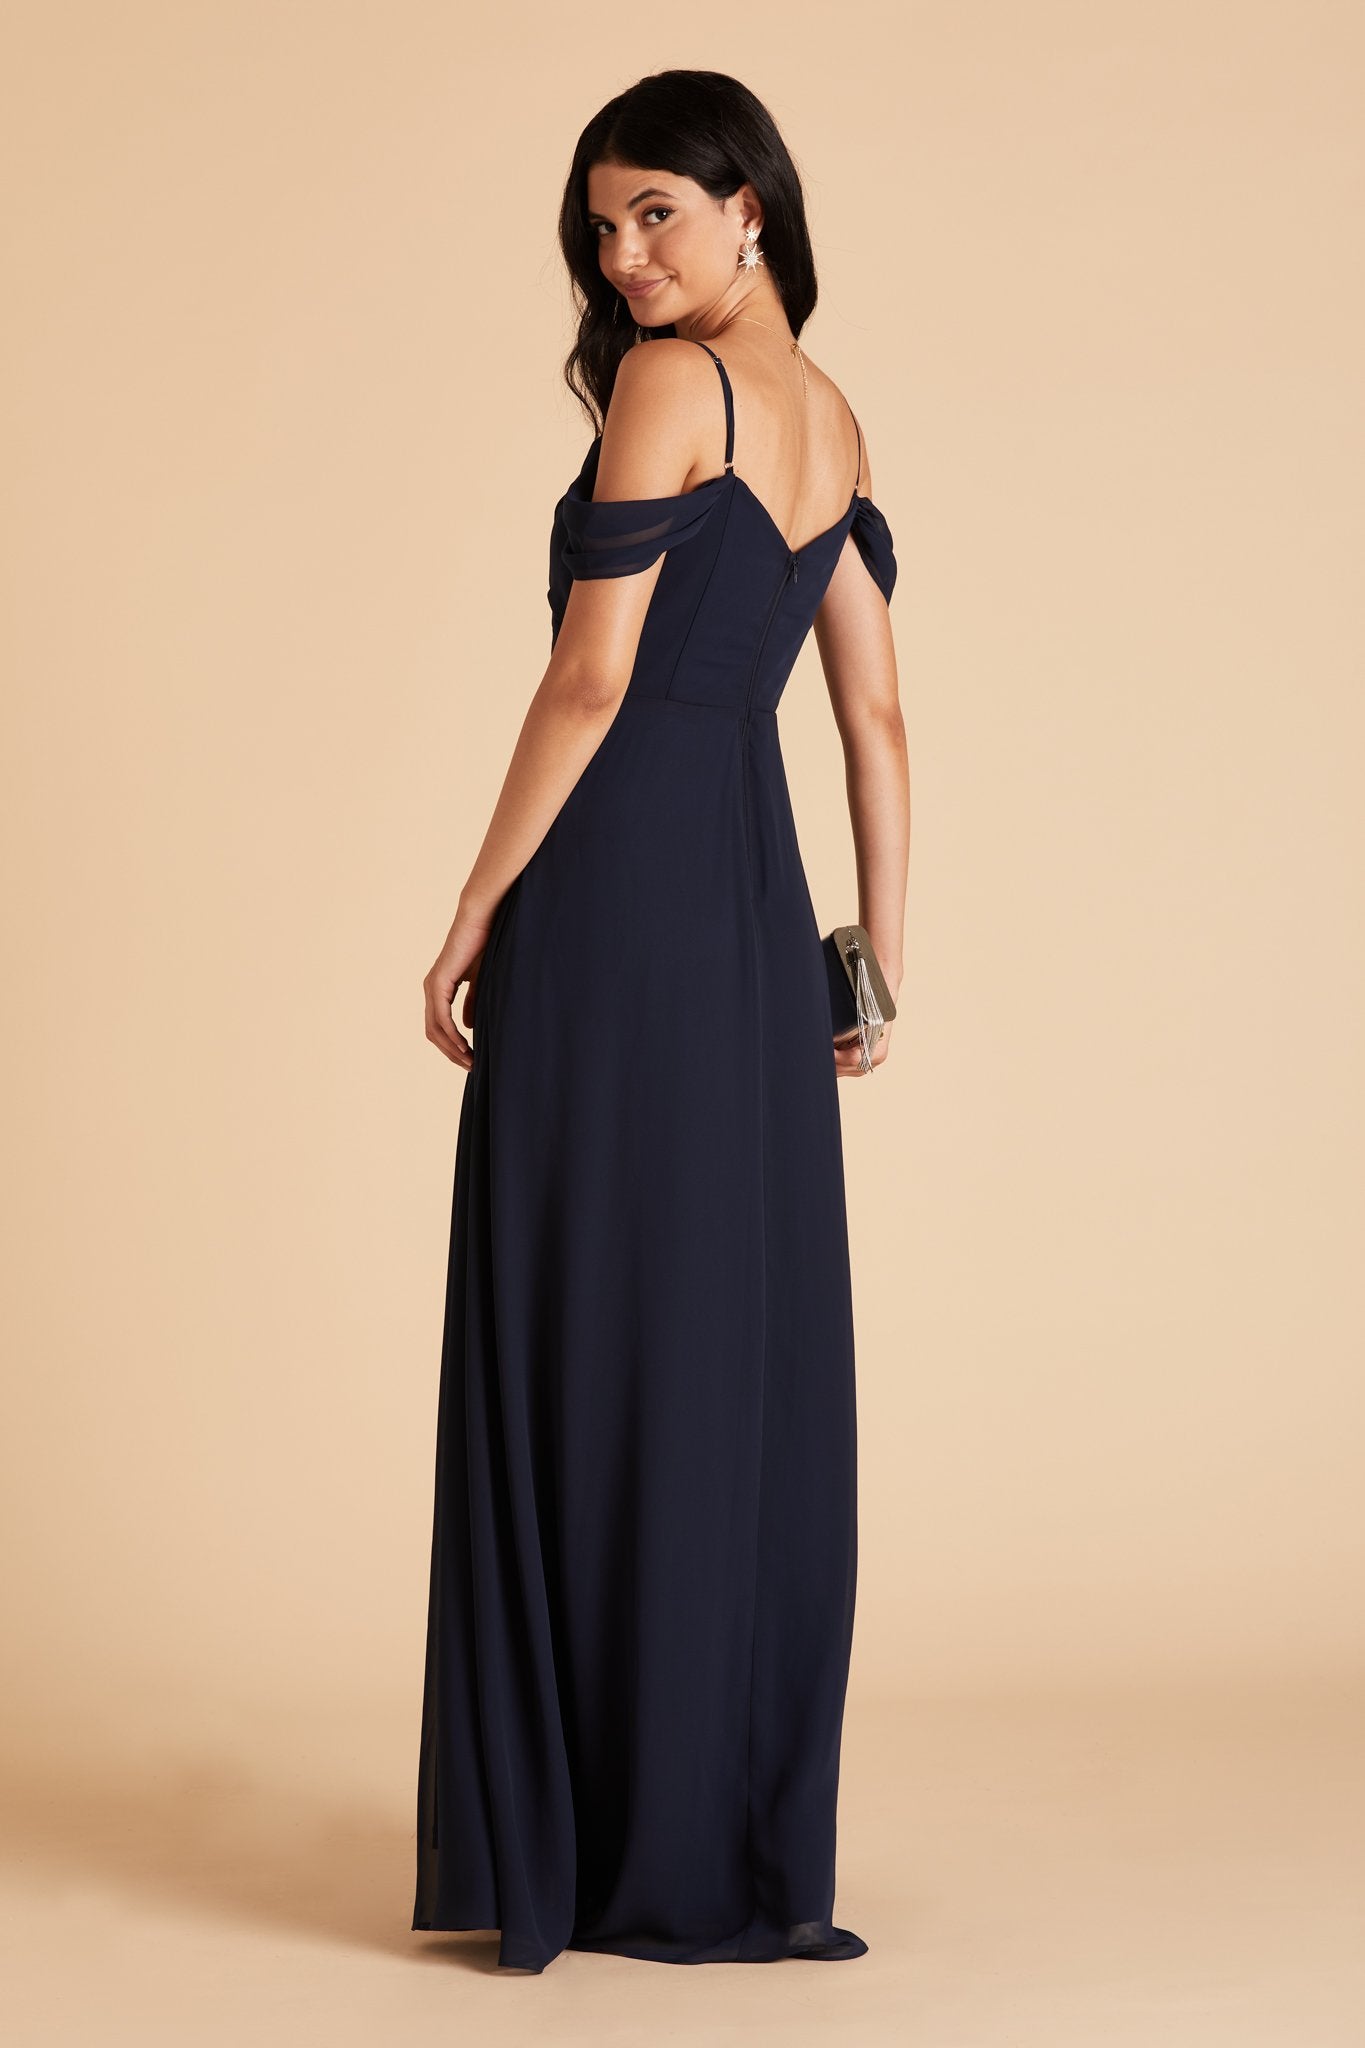 Spence convertible bridesmaid dress in navy blue chiffon by Birdy Grey, side view